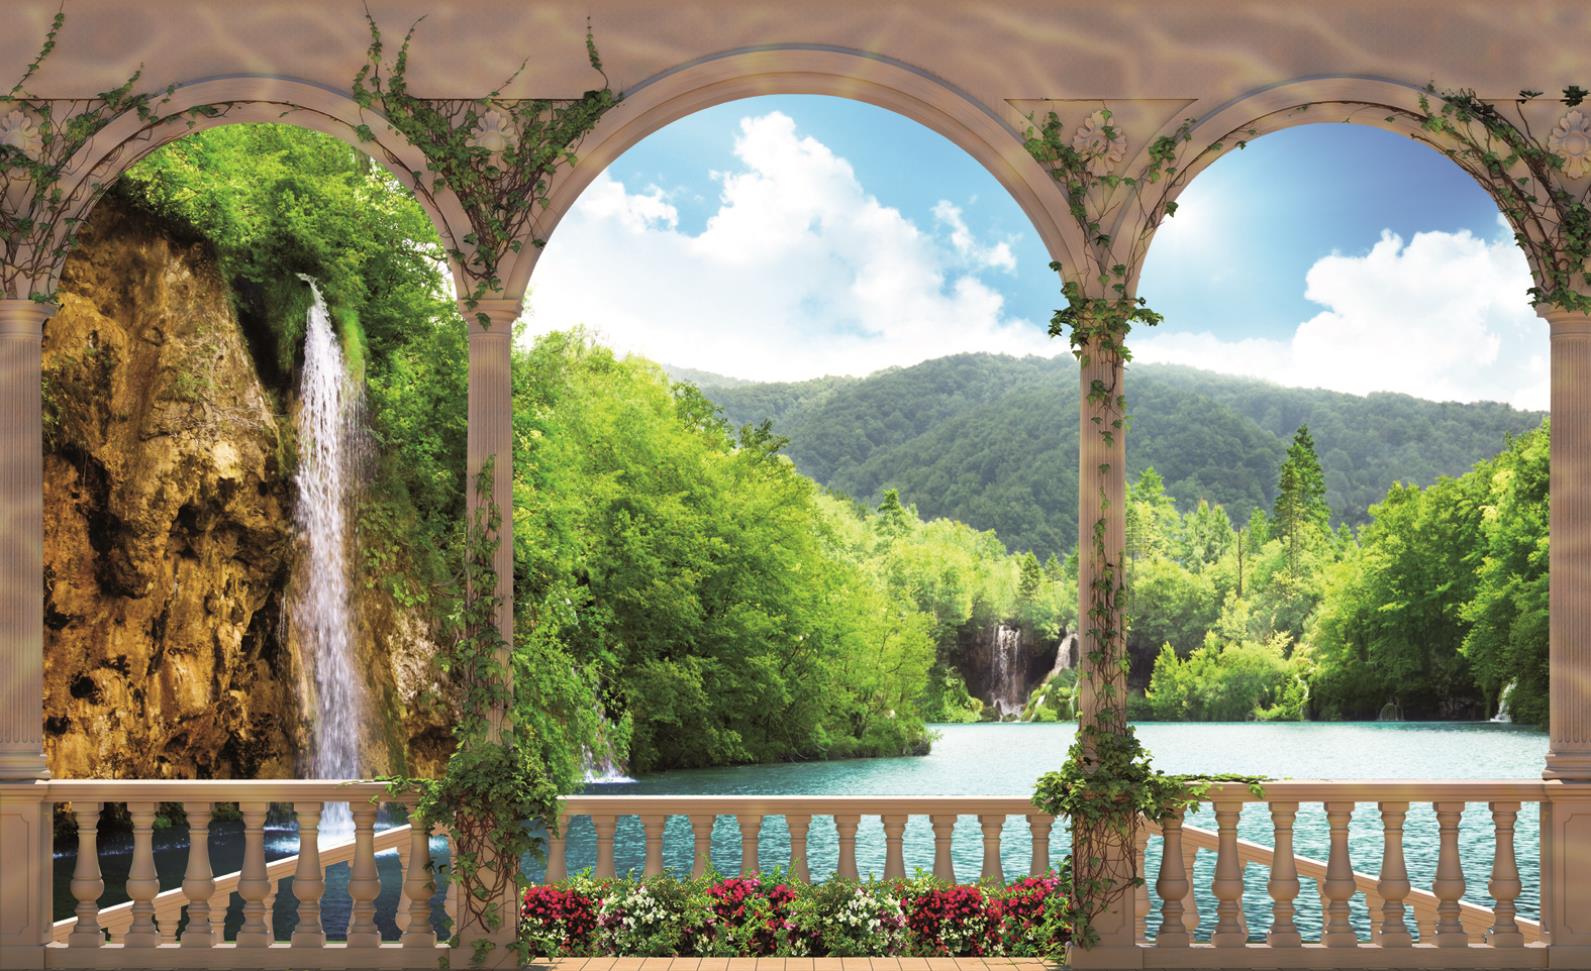 Wall Mural Photo Wallpaper Picture 1079ve Arches Landscape Lake